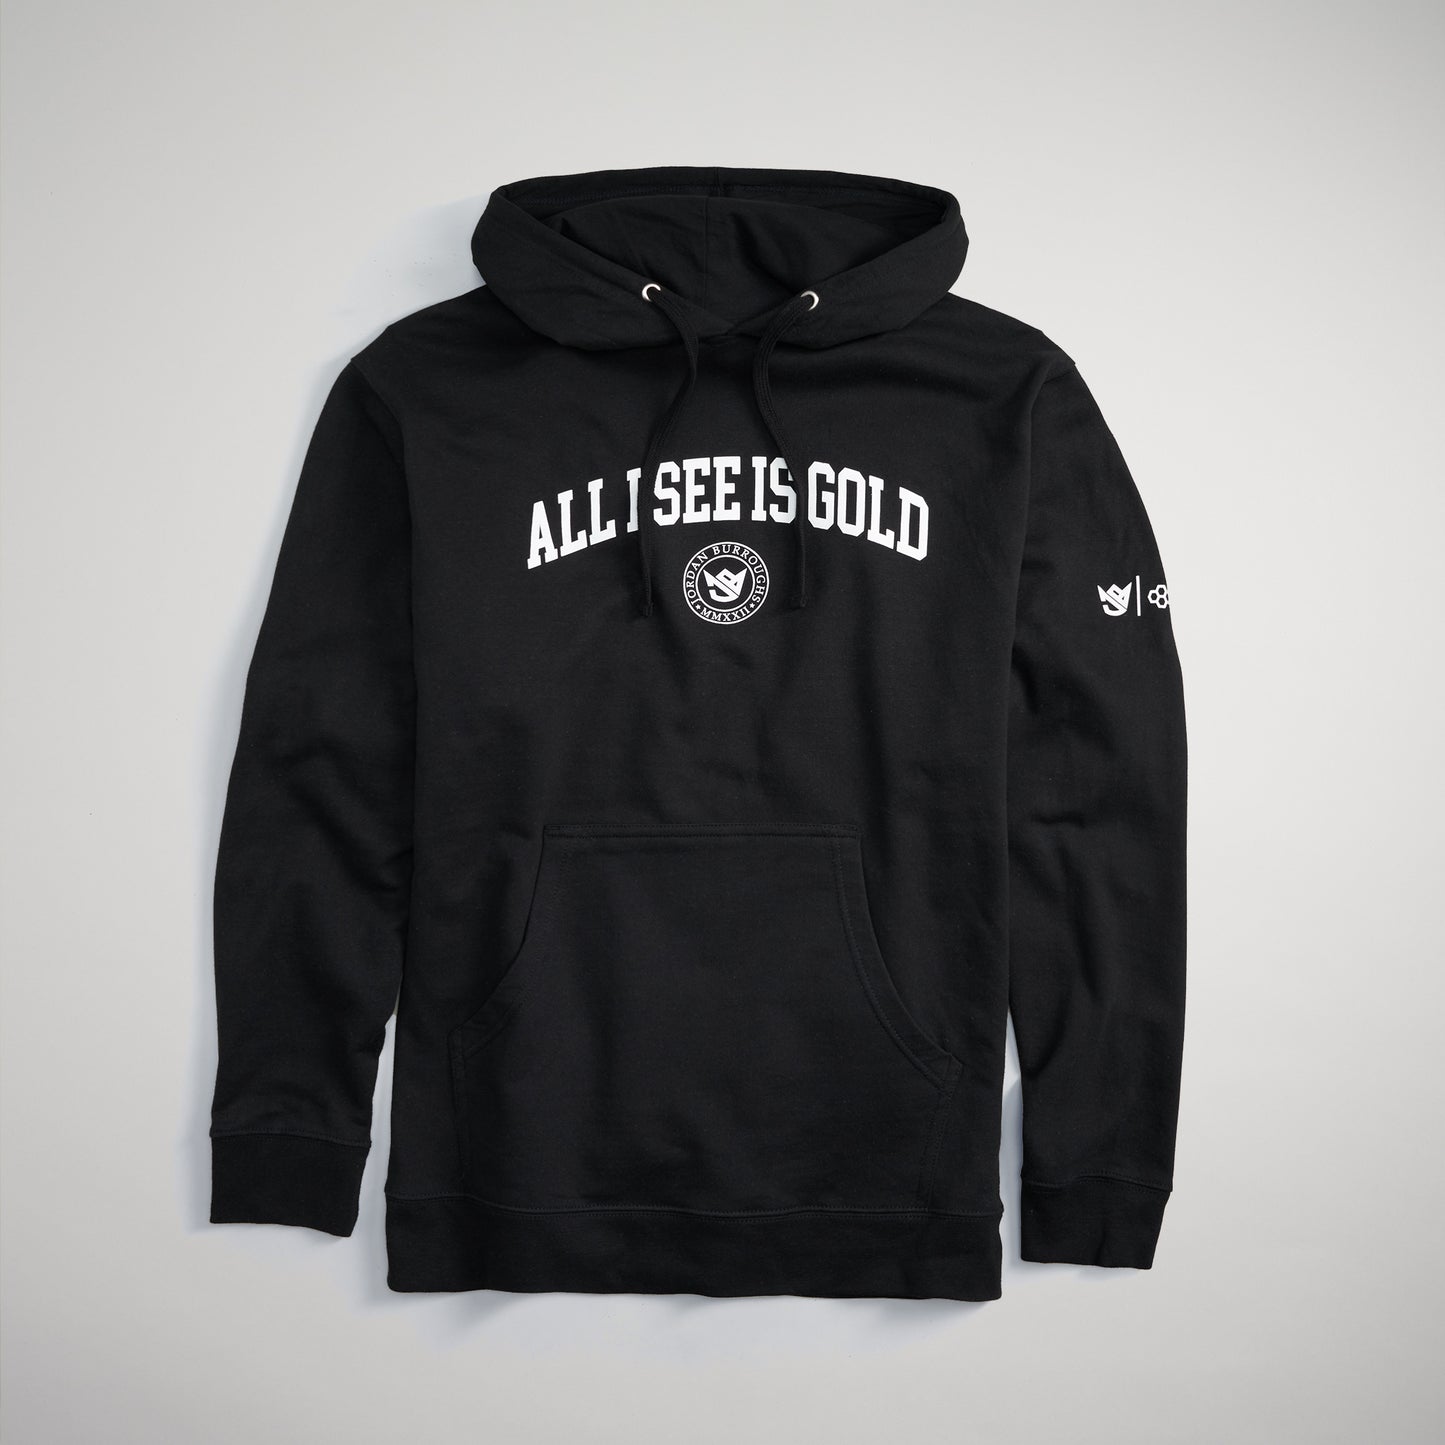 JB ALL I See is Gold Hoodie